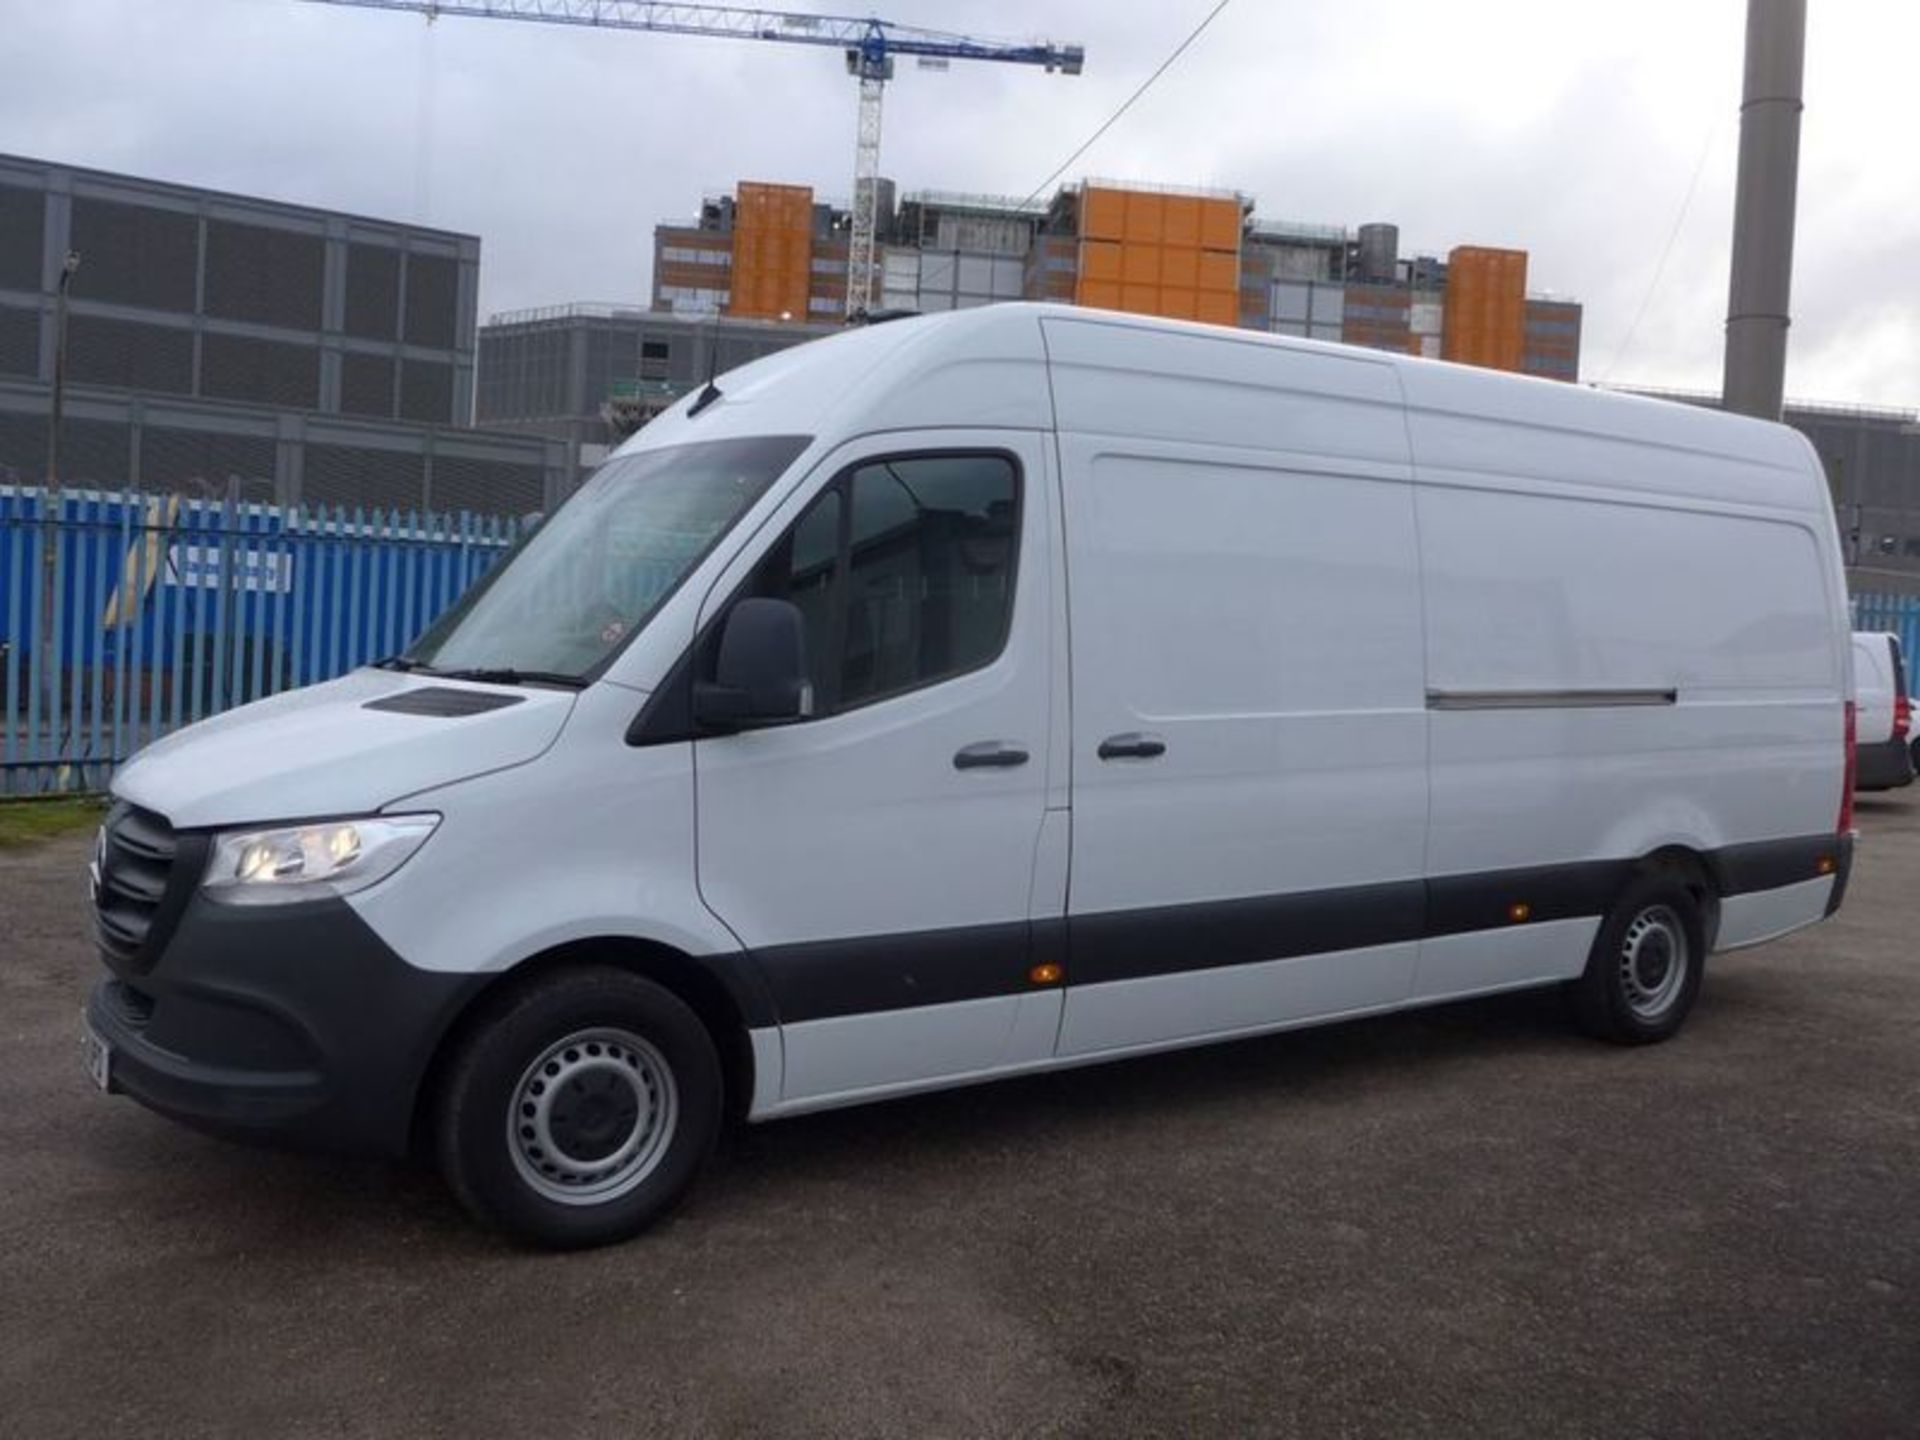 MERCEDES SPRINTER 314CDI 'LWB" HIGH ROOF (140) EURO 6 "2019 MODEL" - NEW SHAPE - 1 OWNER - LOOK!!! - Image 2 of 11